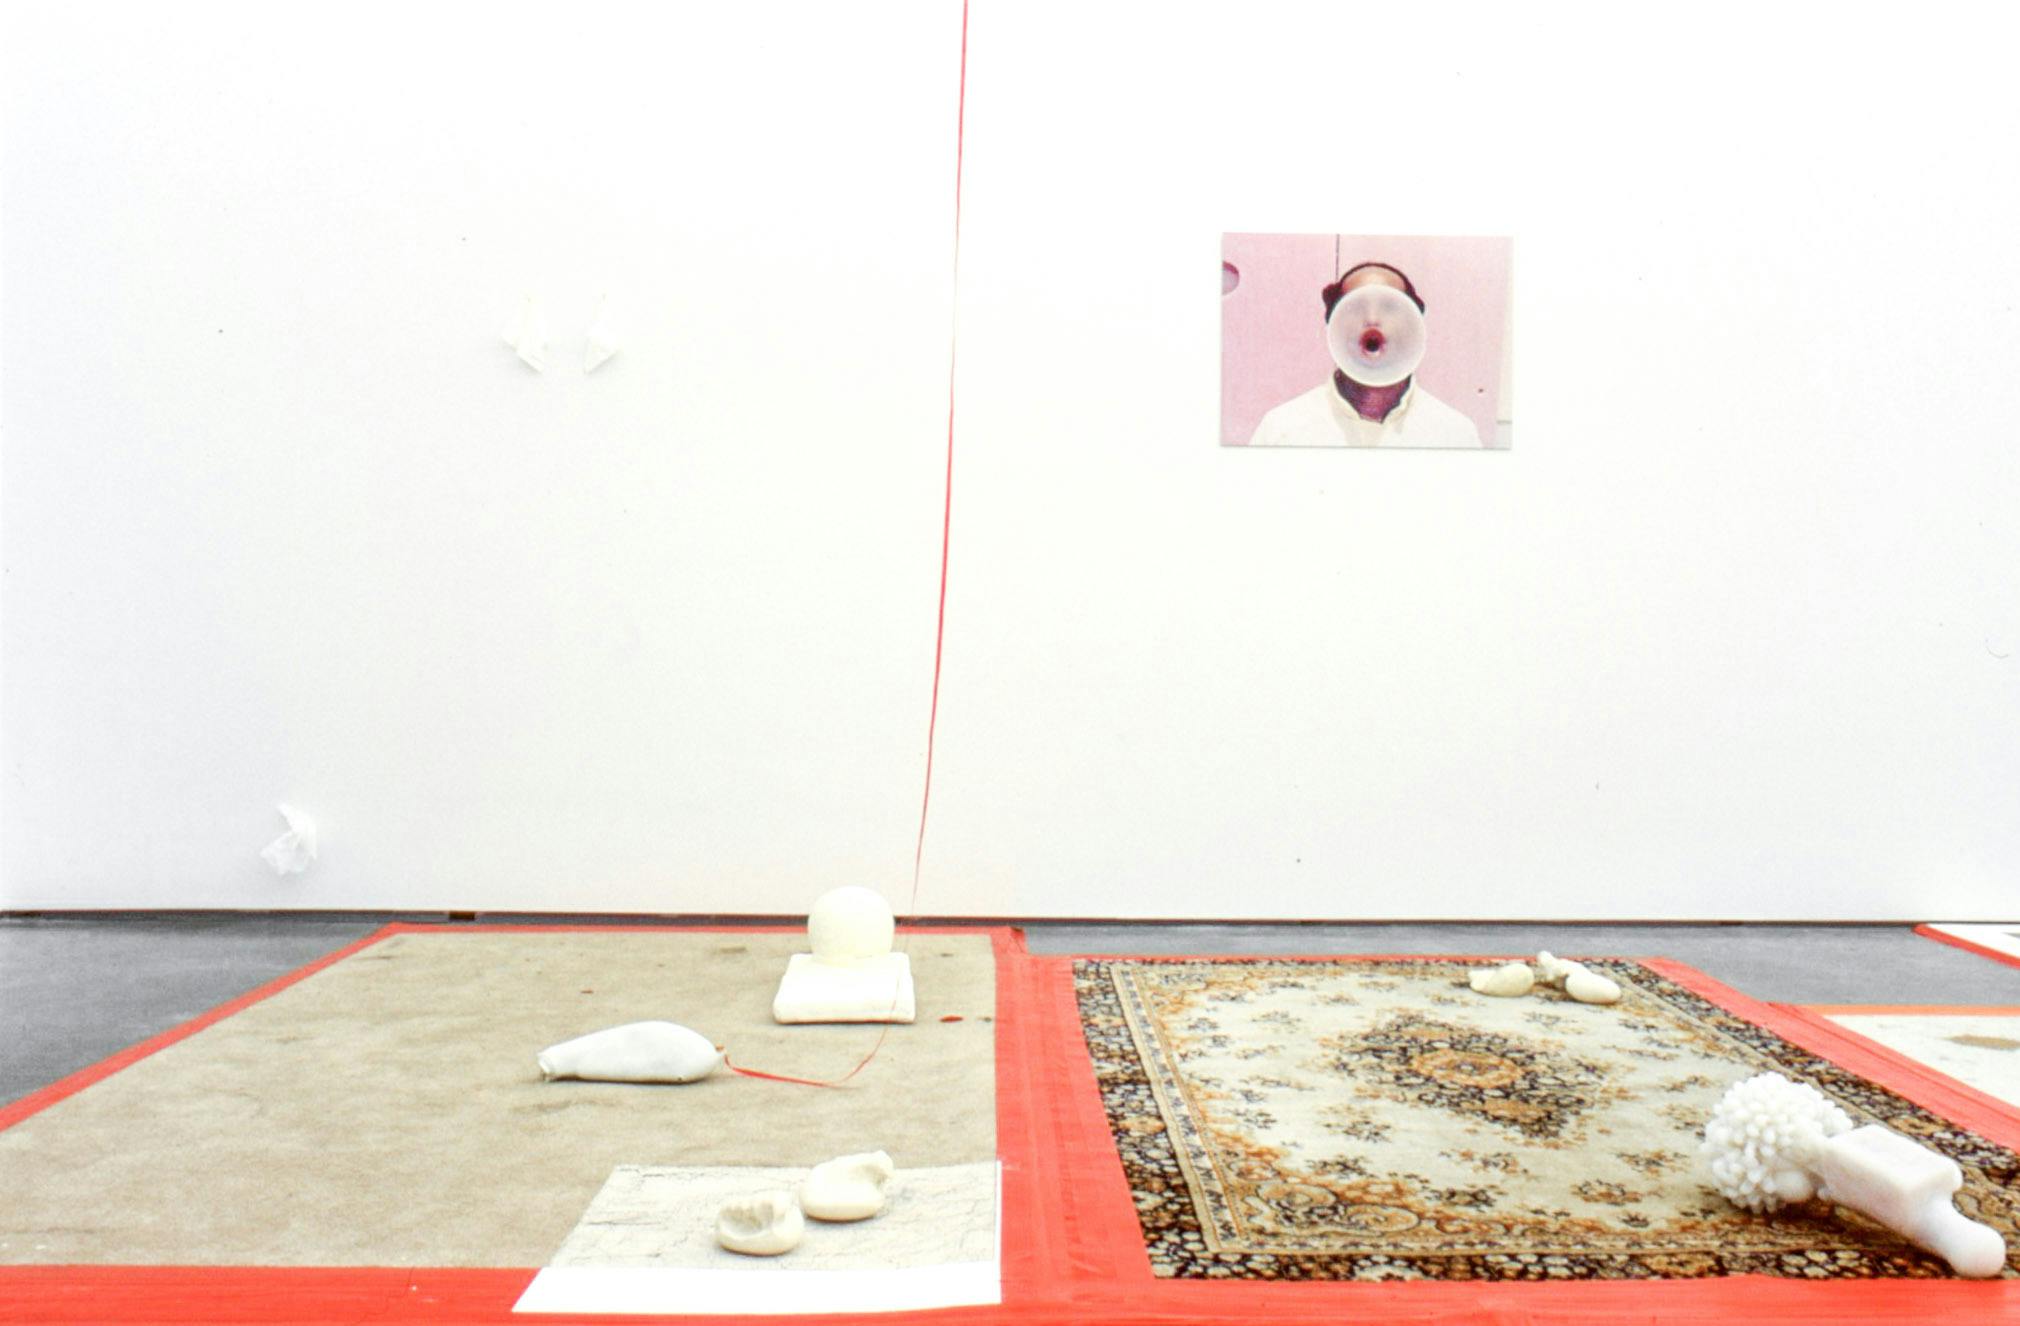 Installation image of works in a gallery. A variety of found objects, including shellfish and glass bottles are placed on a partially carpeted floor. A photograph of a person blowing bubble gum is mounted on the far wall.